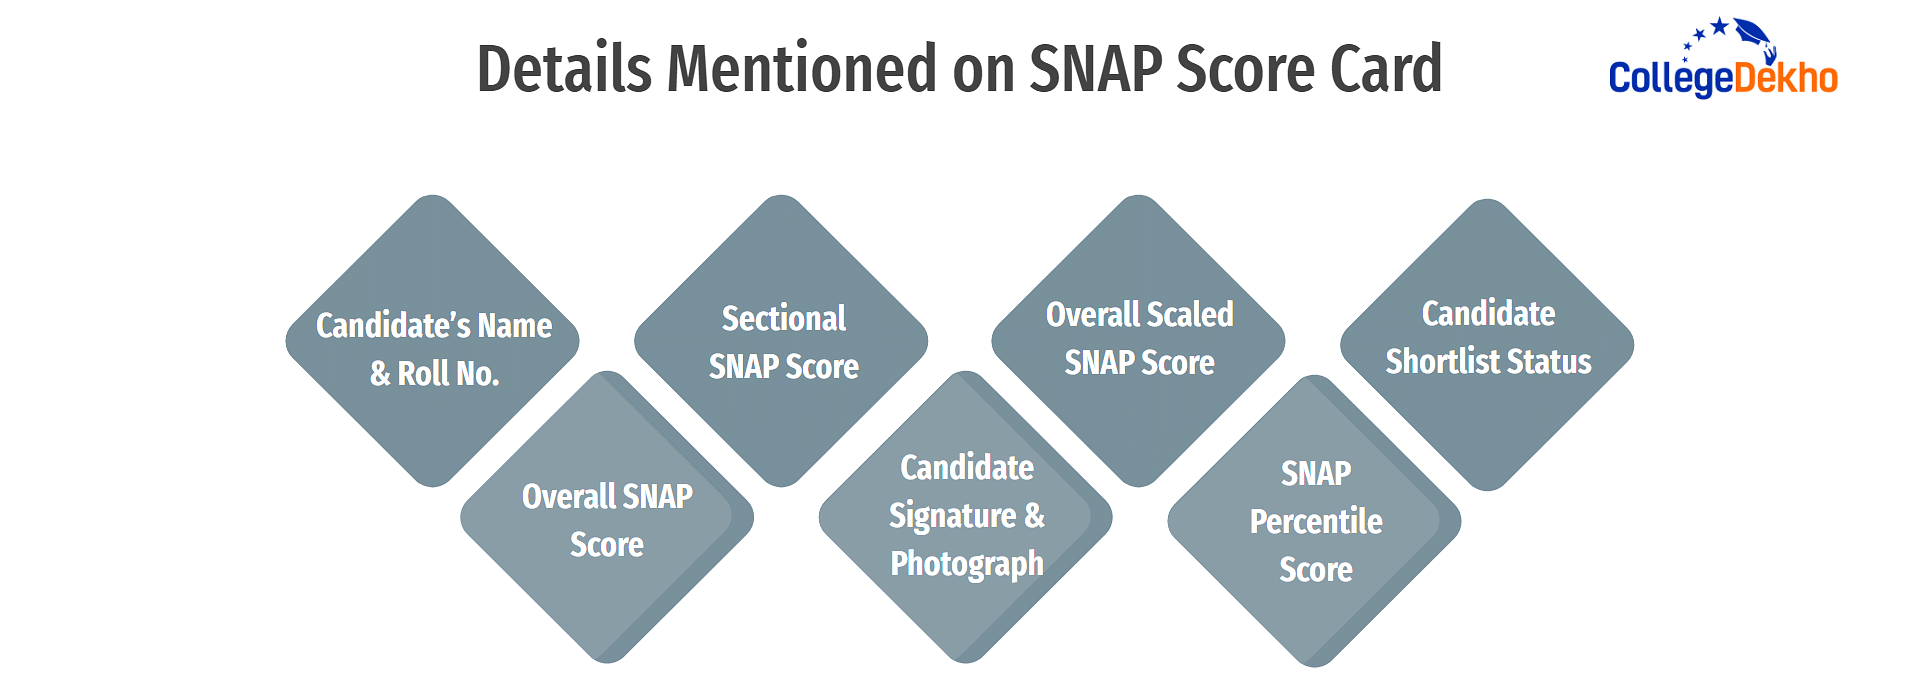 Details Mentioned on SNAP Score Card